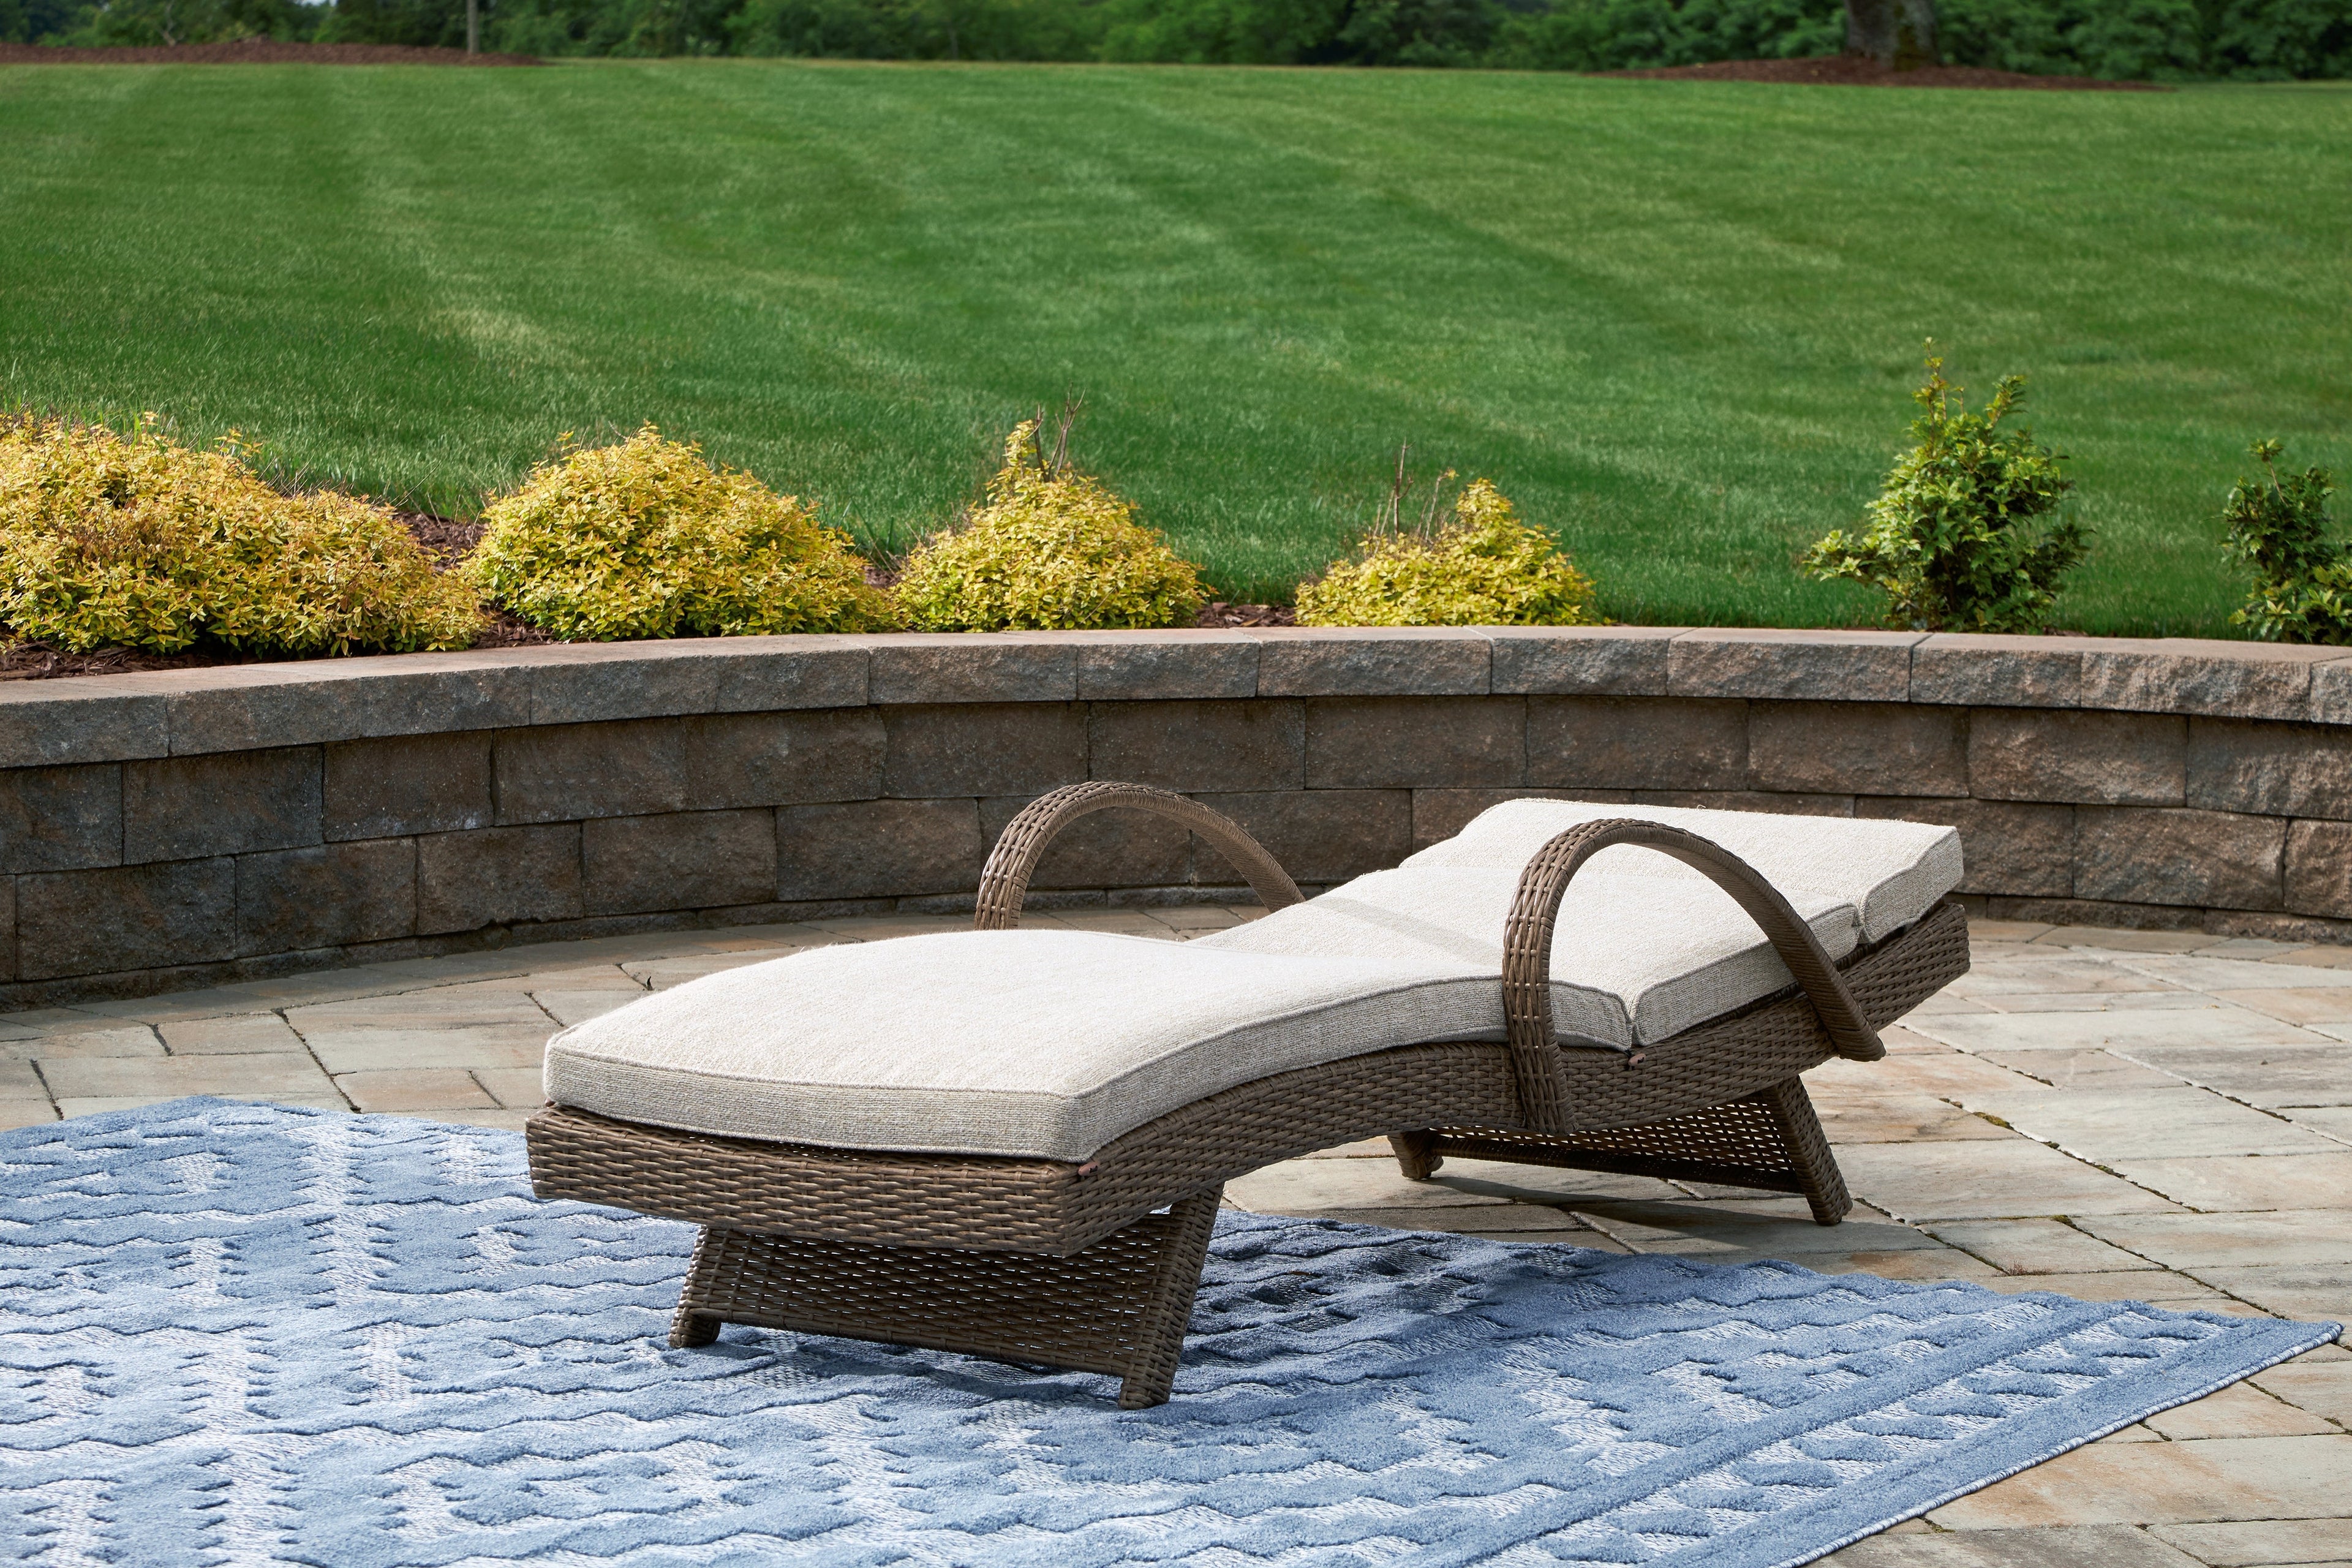 Beachcroft Beige Outdoor Chaise Lounge with Cushion - P791-815 - Bien Home Furniture &amp; Electronics